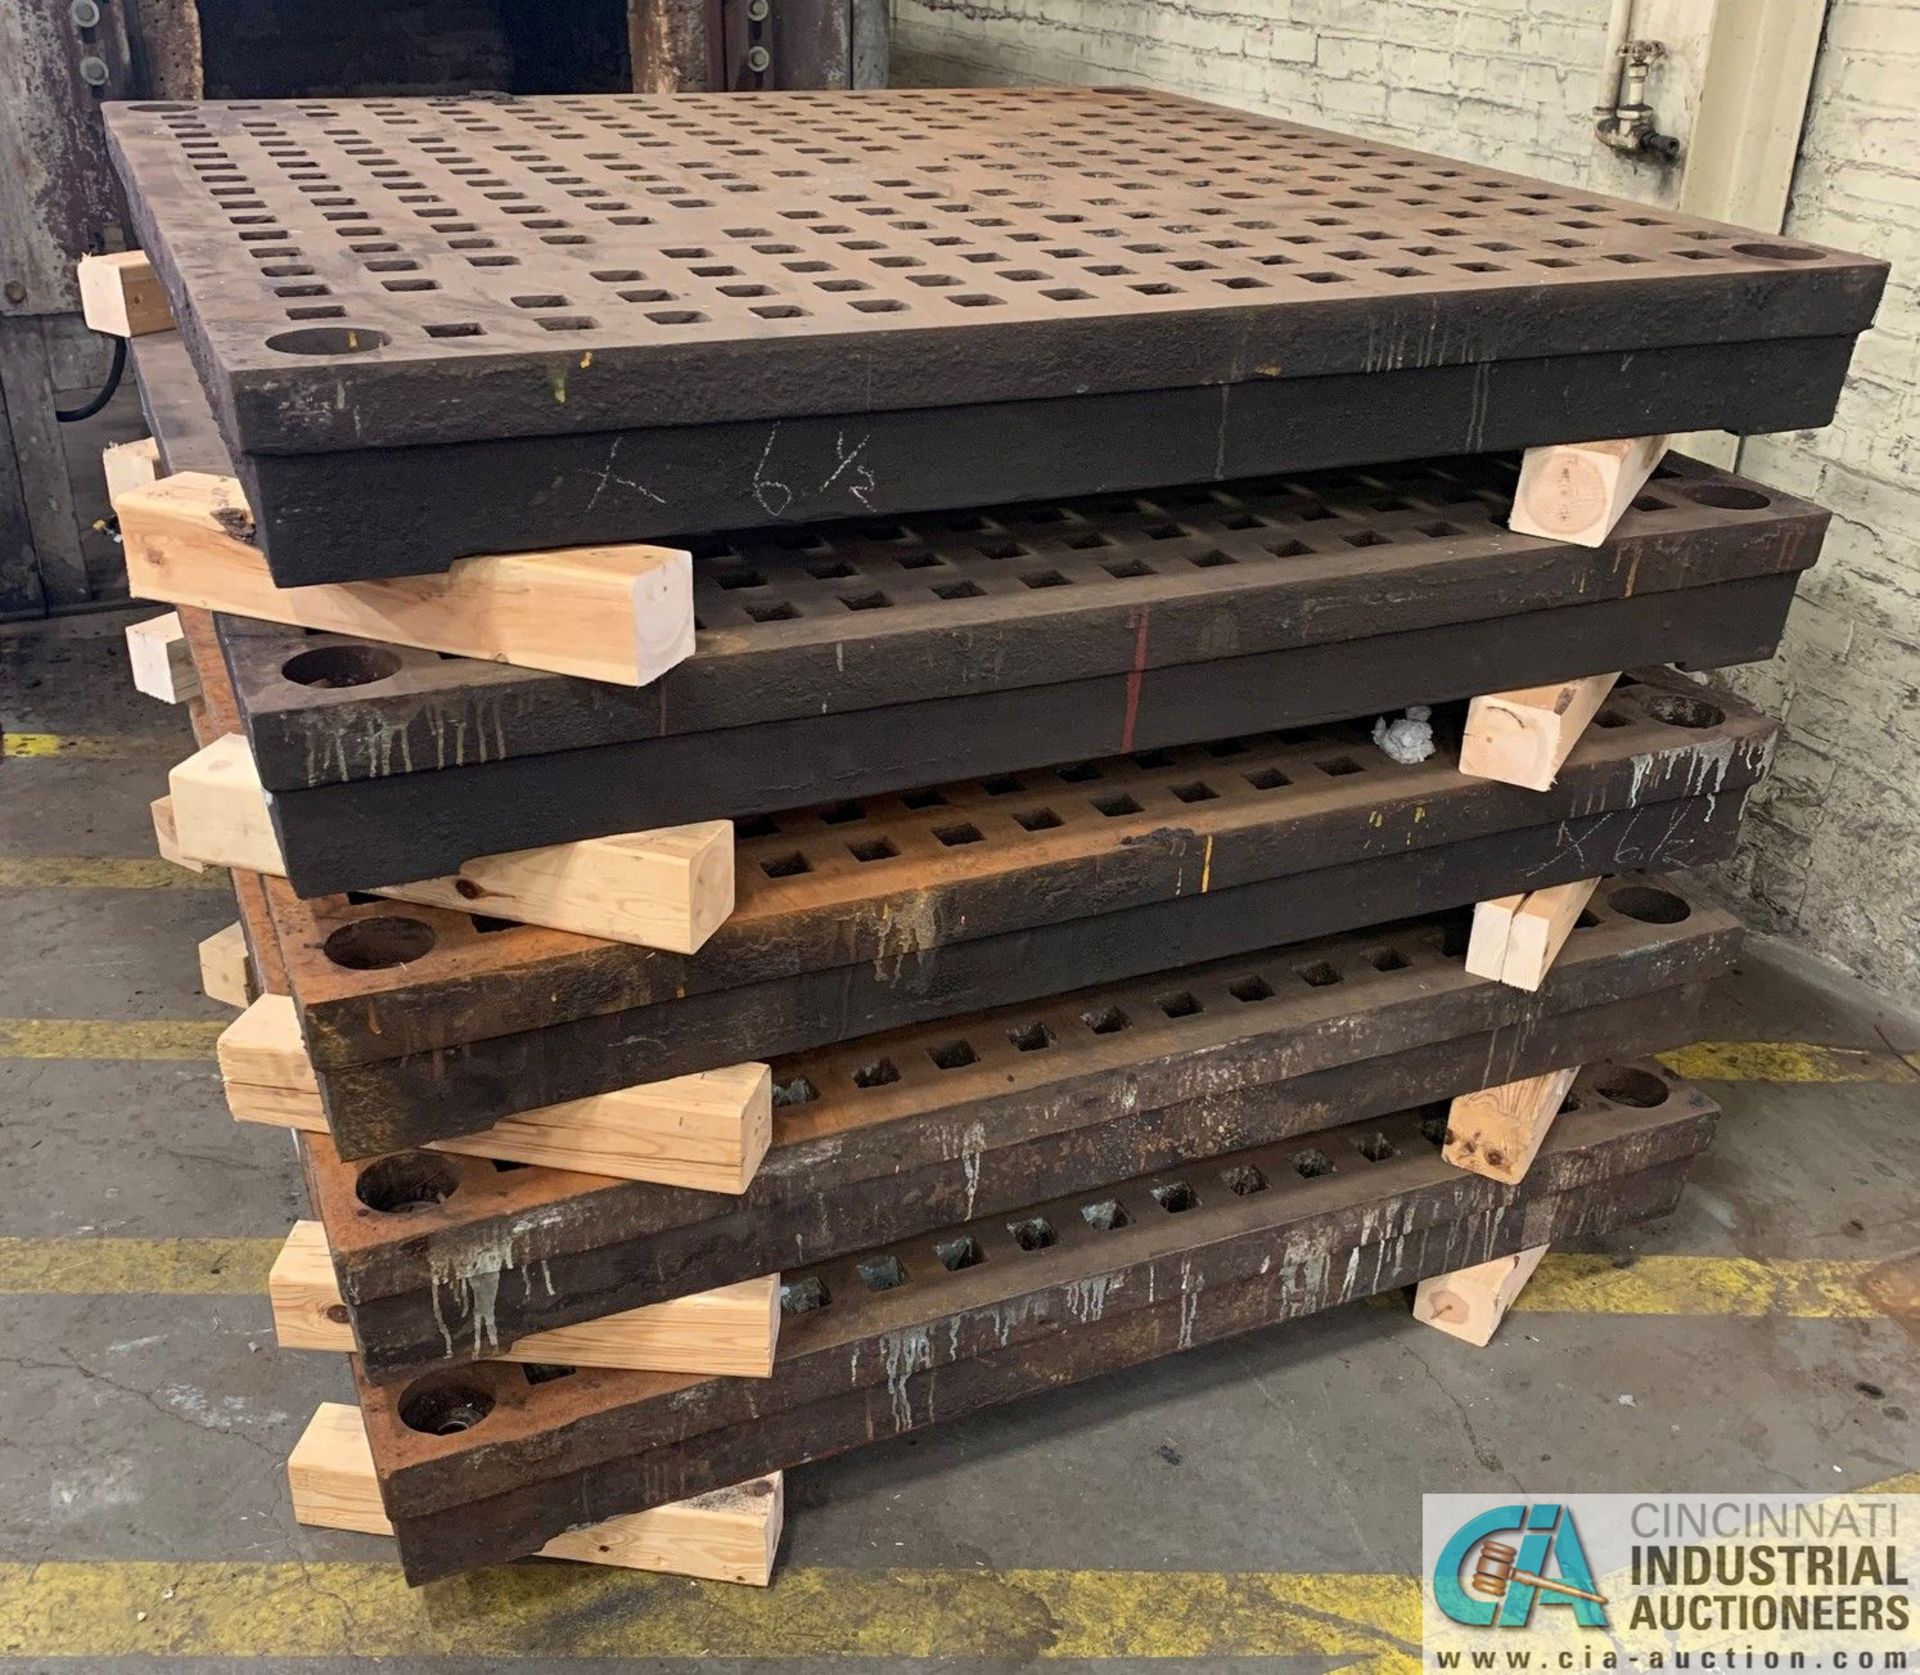 60" X 60" ACORN WELDING PLATE **ONLY (1) PLATE PER LOT**LOCATED AT 1400 OAK ST., TOLEDO, OHIO**